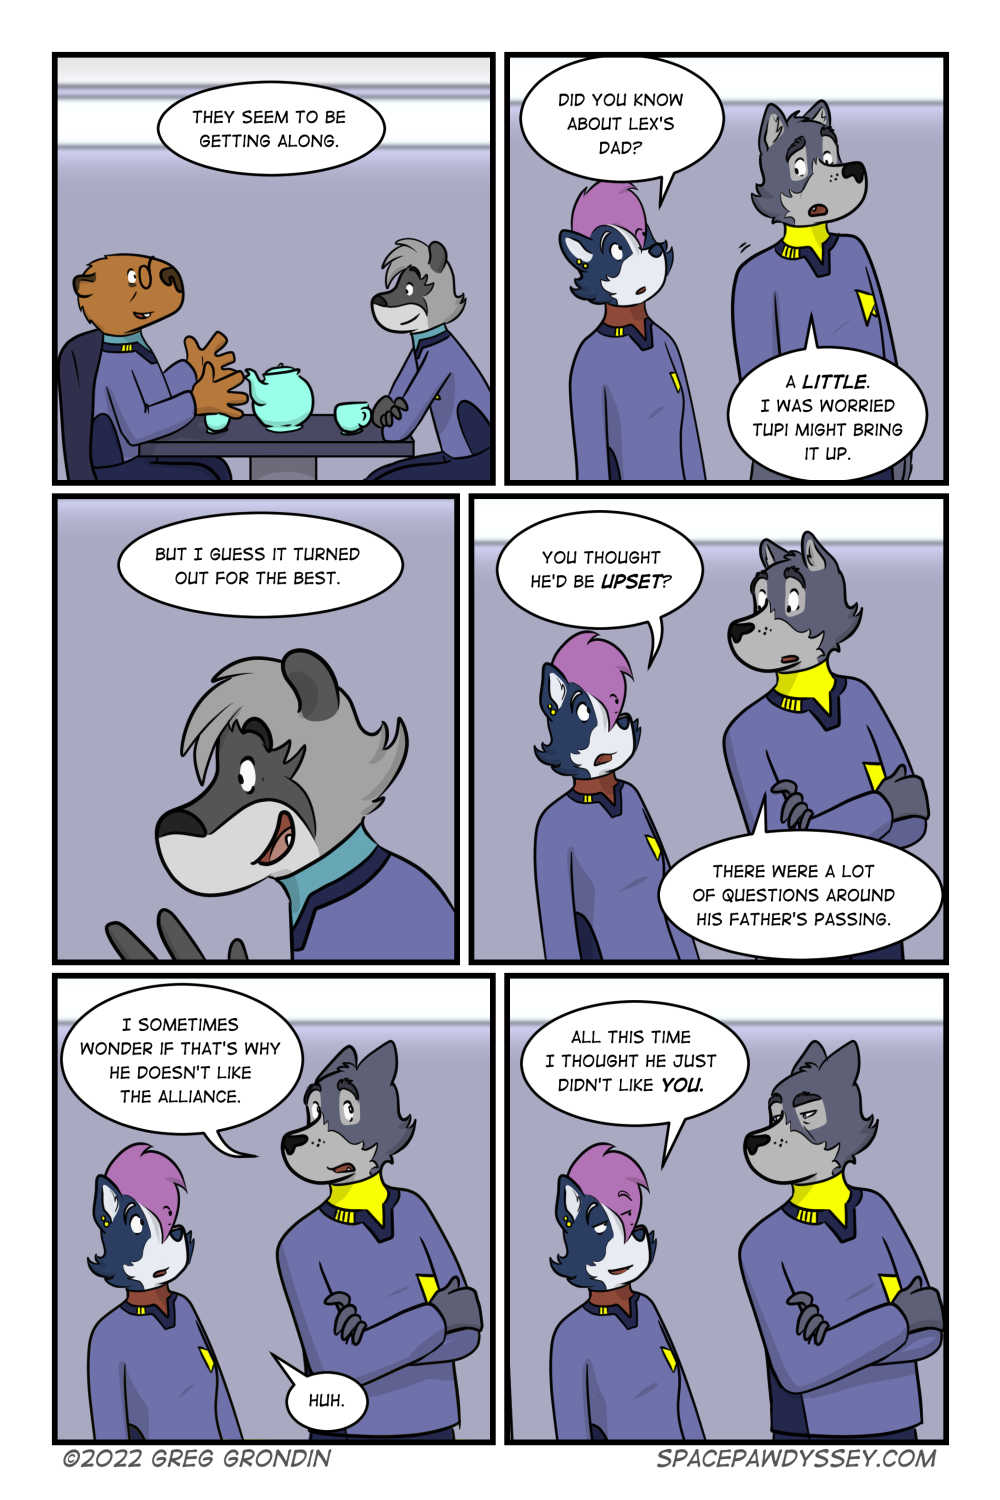 Space Pawdyssey #533